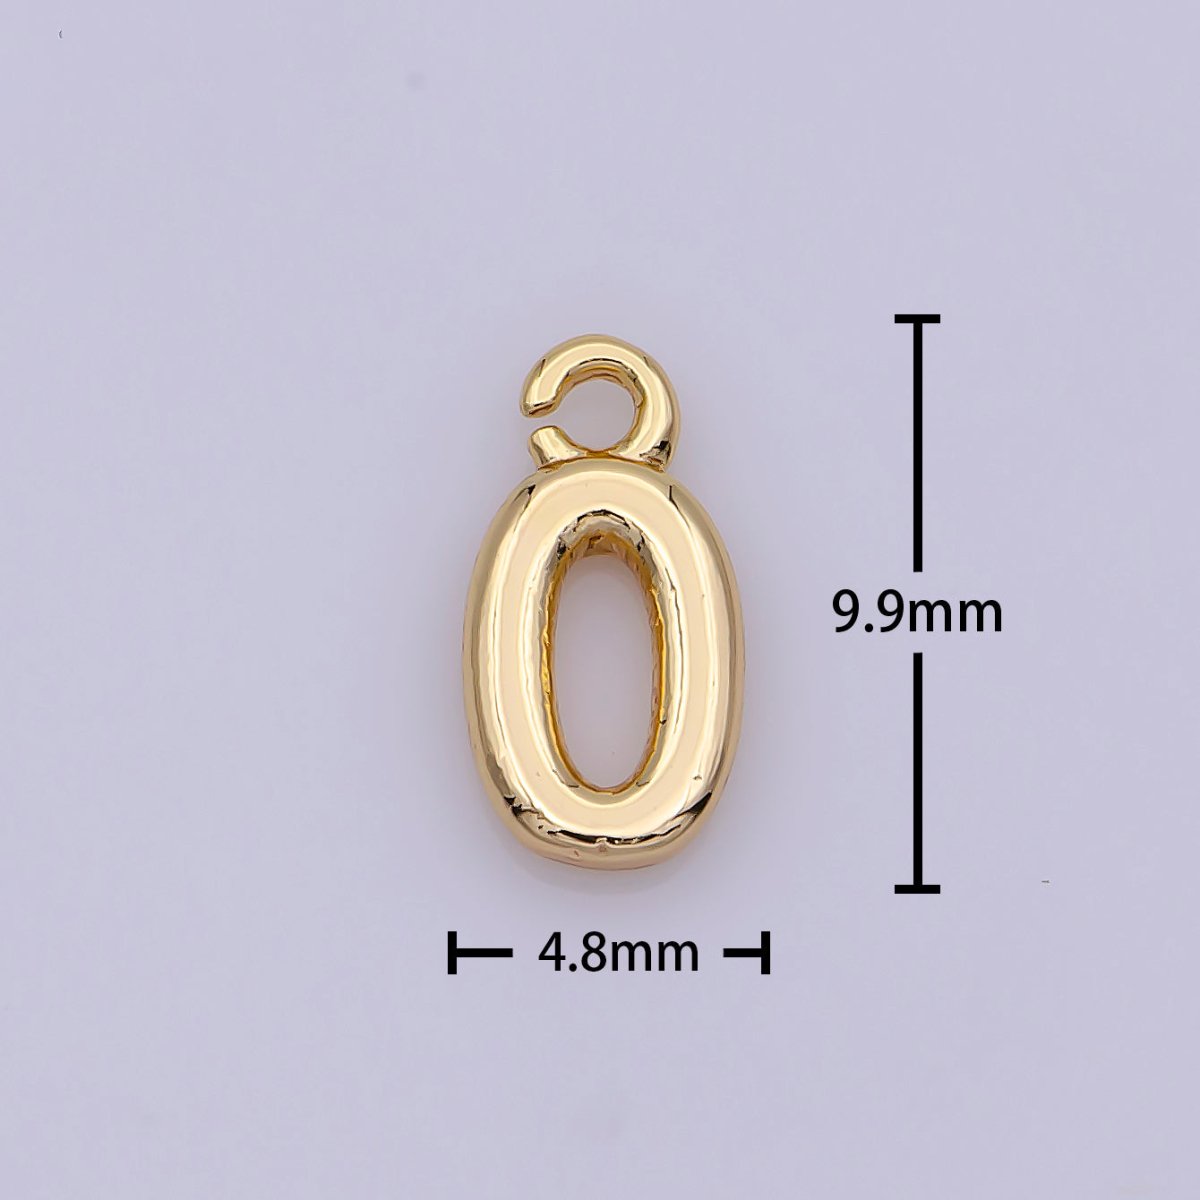 Pendant BAIL Clasp in 18K Gold Filled, Charm Bail Clasp, Closure Clasp, Removable Bail Clasp for Jewelry Making Supply - DLUXCA